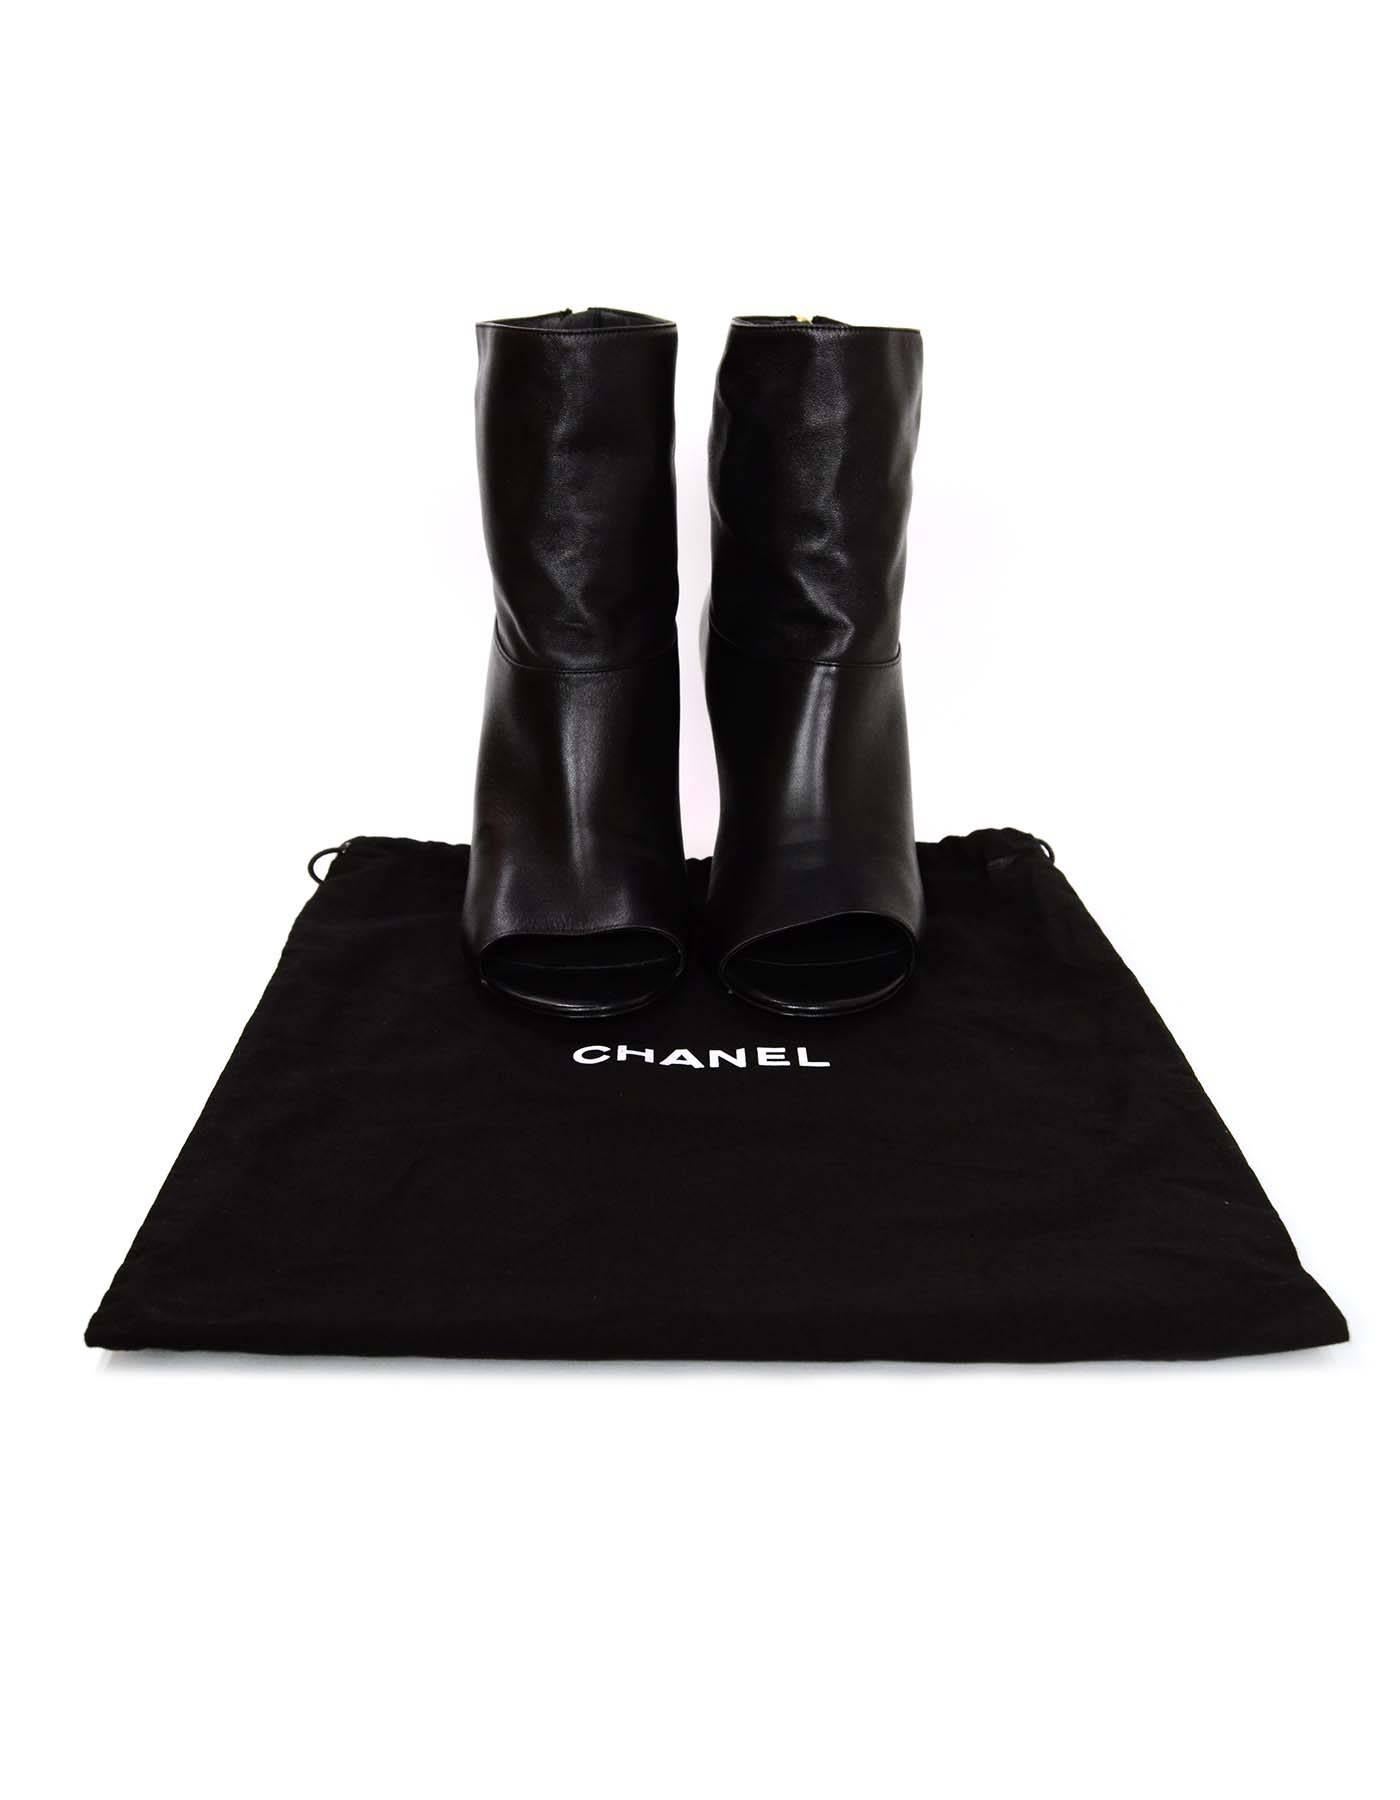 Chanel Black Leather Open-Toe Ankle Boots w/ Pearl Heel Sz 36.5 NEW 2